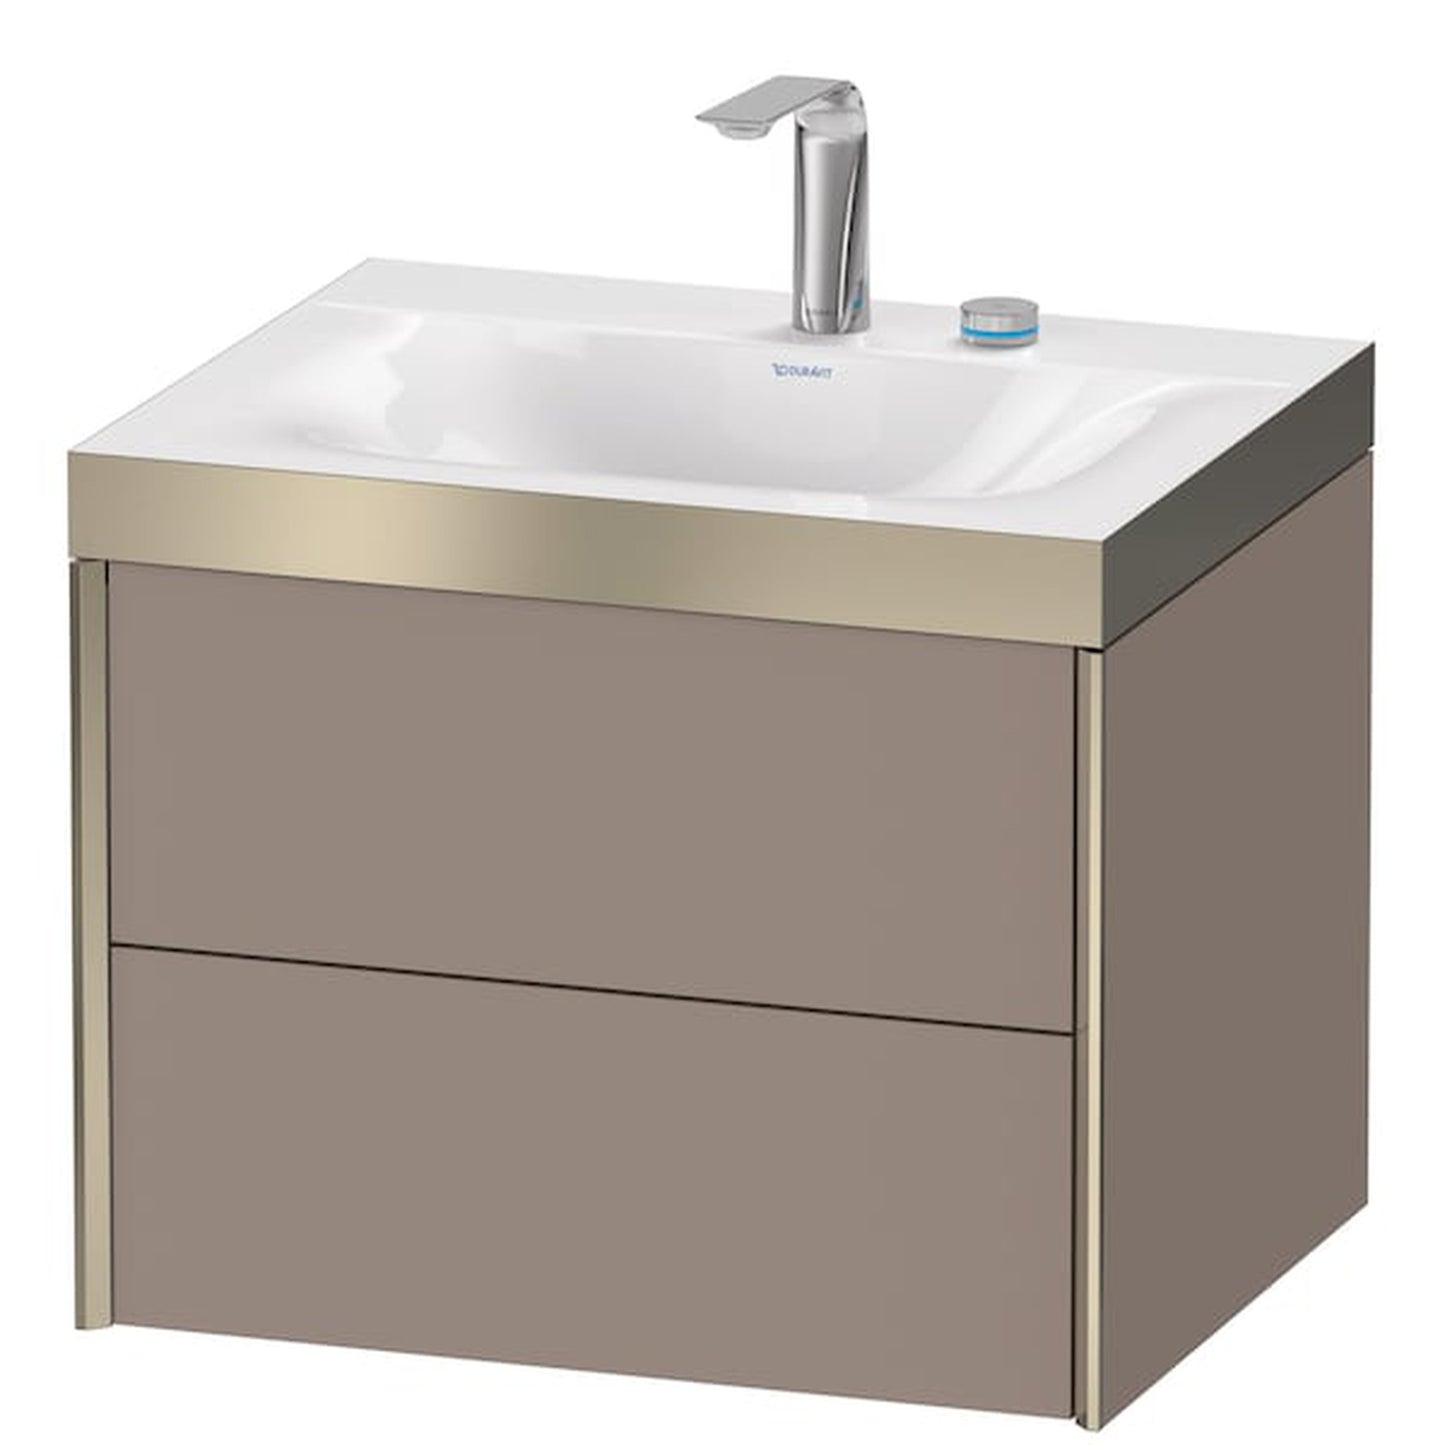 Duravit Xviu 24" x 20" x 19" Two Drawer C-Bonded Wall-Mount Vanity Kit With Two Tap Holes, Basalt (XV4614EB143P)